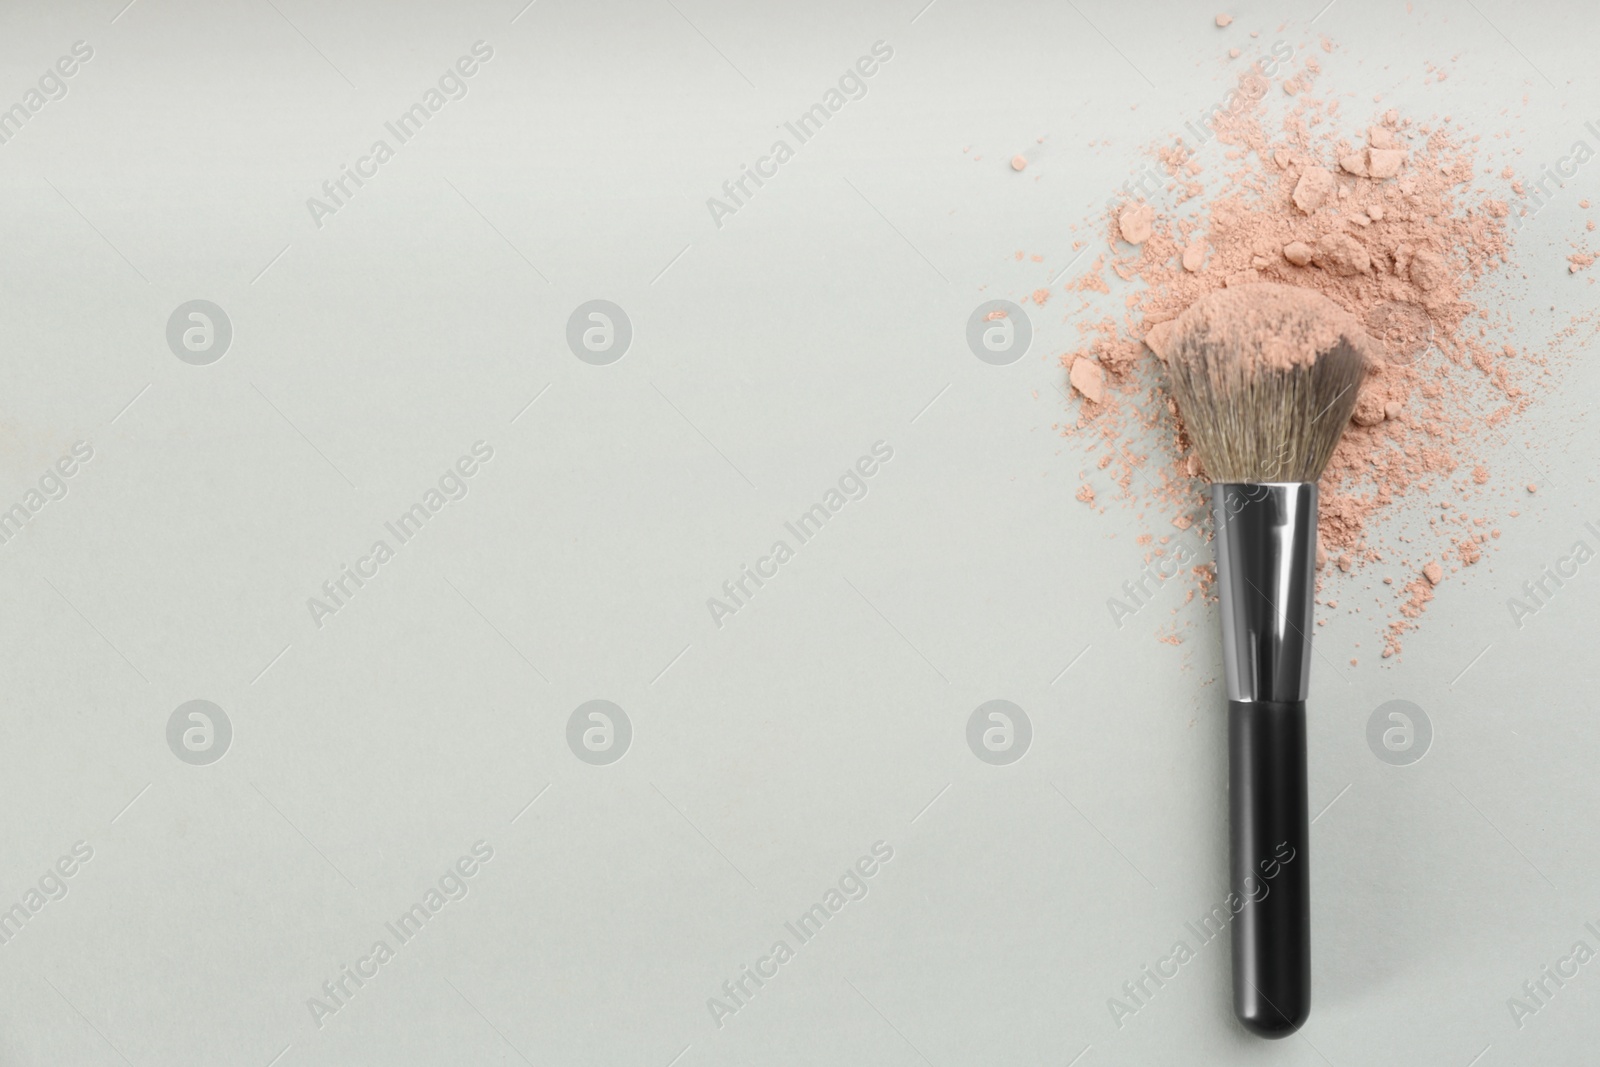 Photo of Makeup brush and scattered face powder on light grey background, top view. Space for text